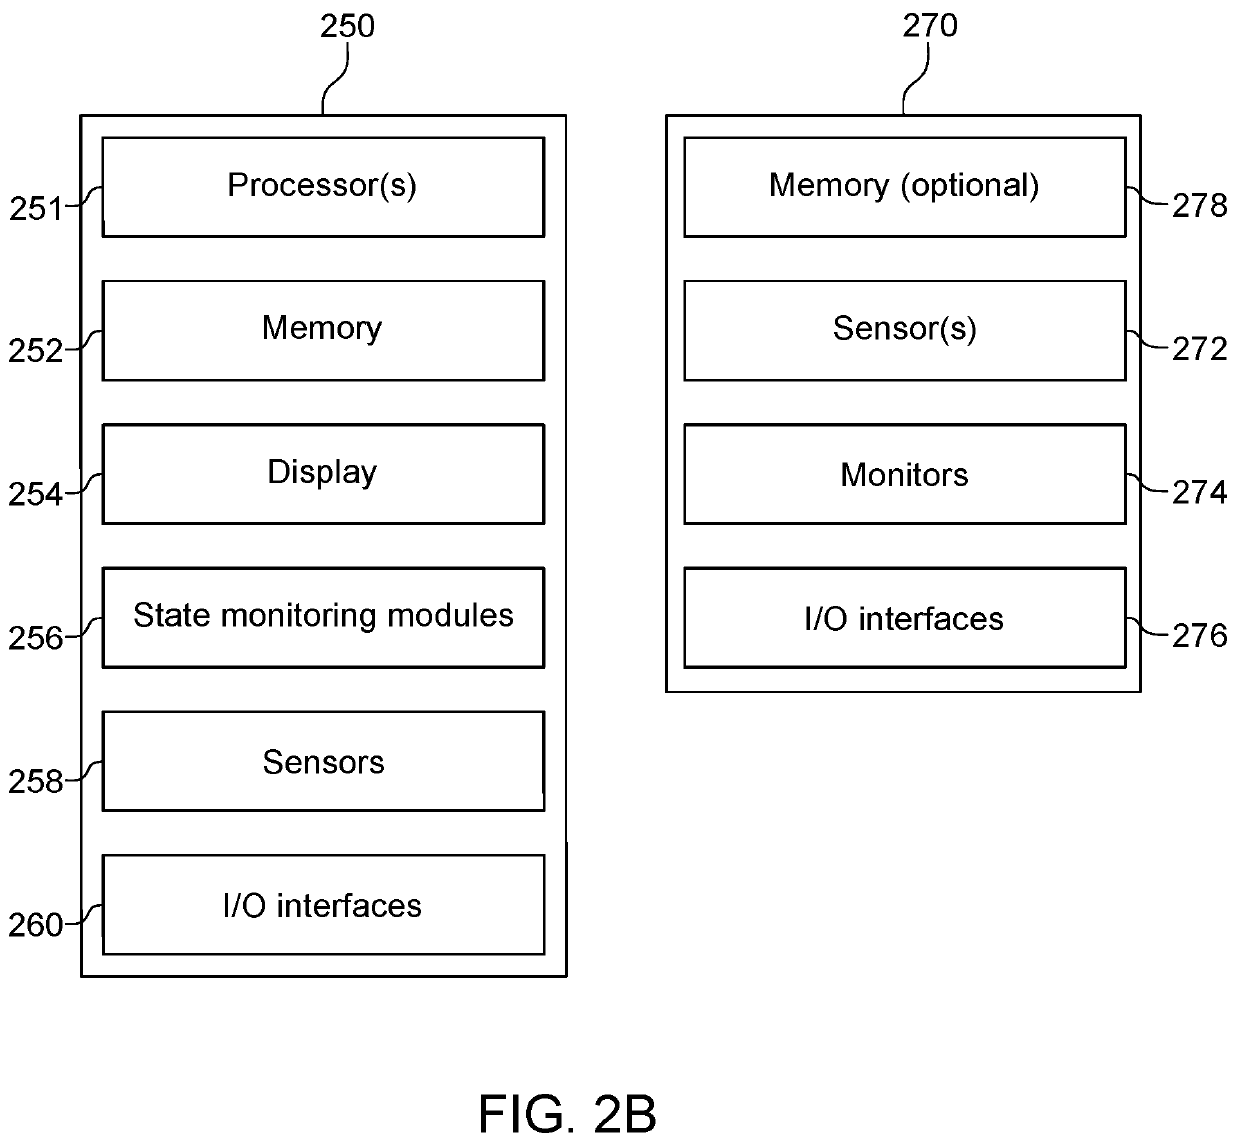 Re-routing autonomous vehicles using dynamic routing and memory management for border security purposes